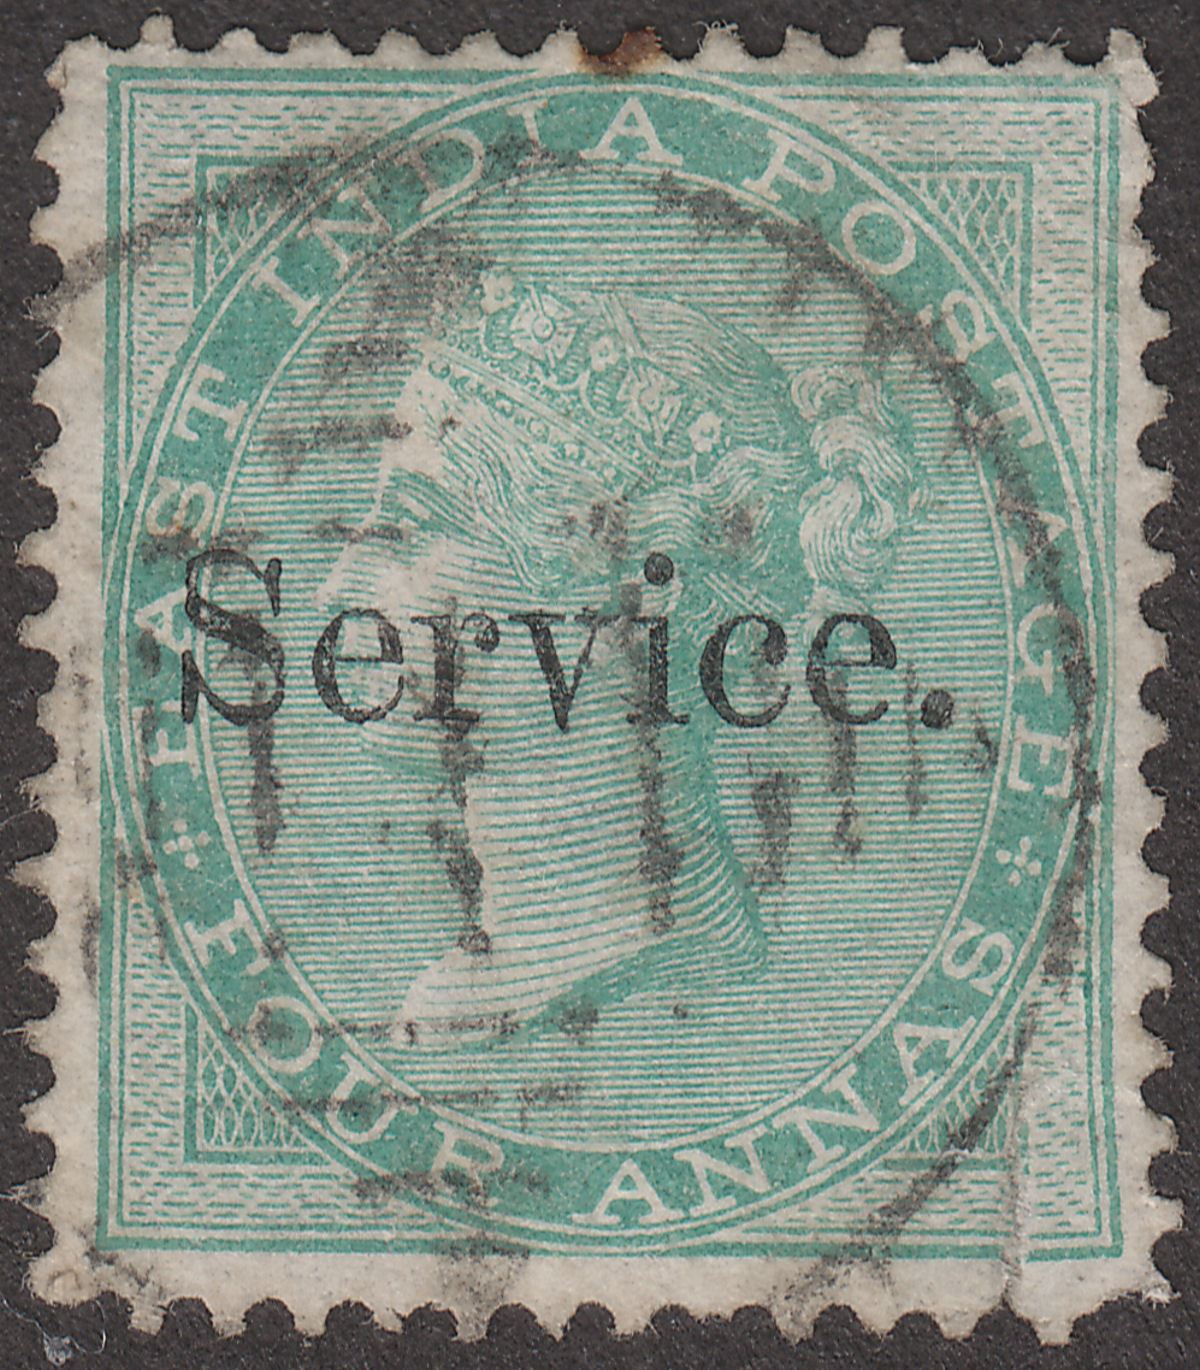 India 1866 QV Official Service Overprint 4a Green Used SG O13 cat £160 faulty